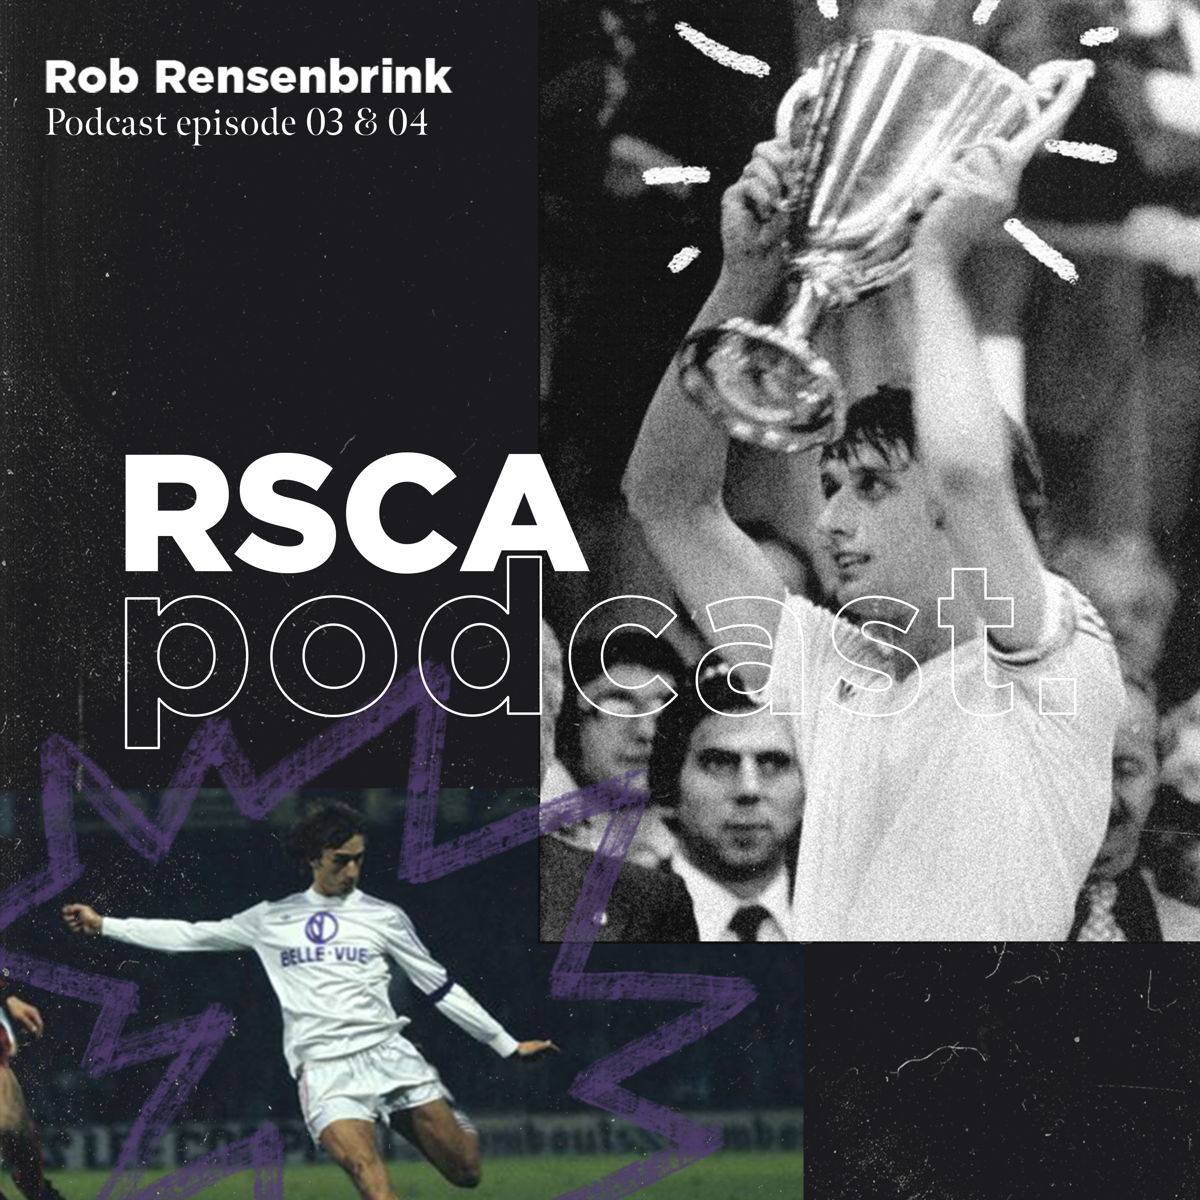 www.rsca.be/podcast